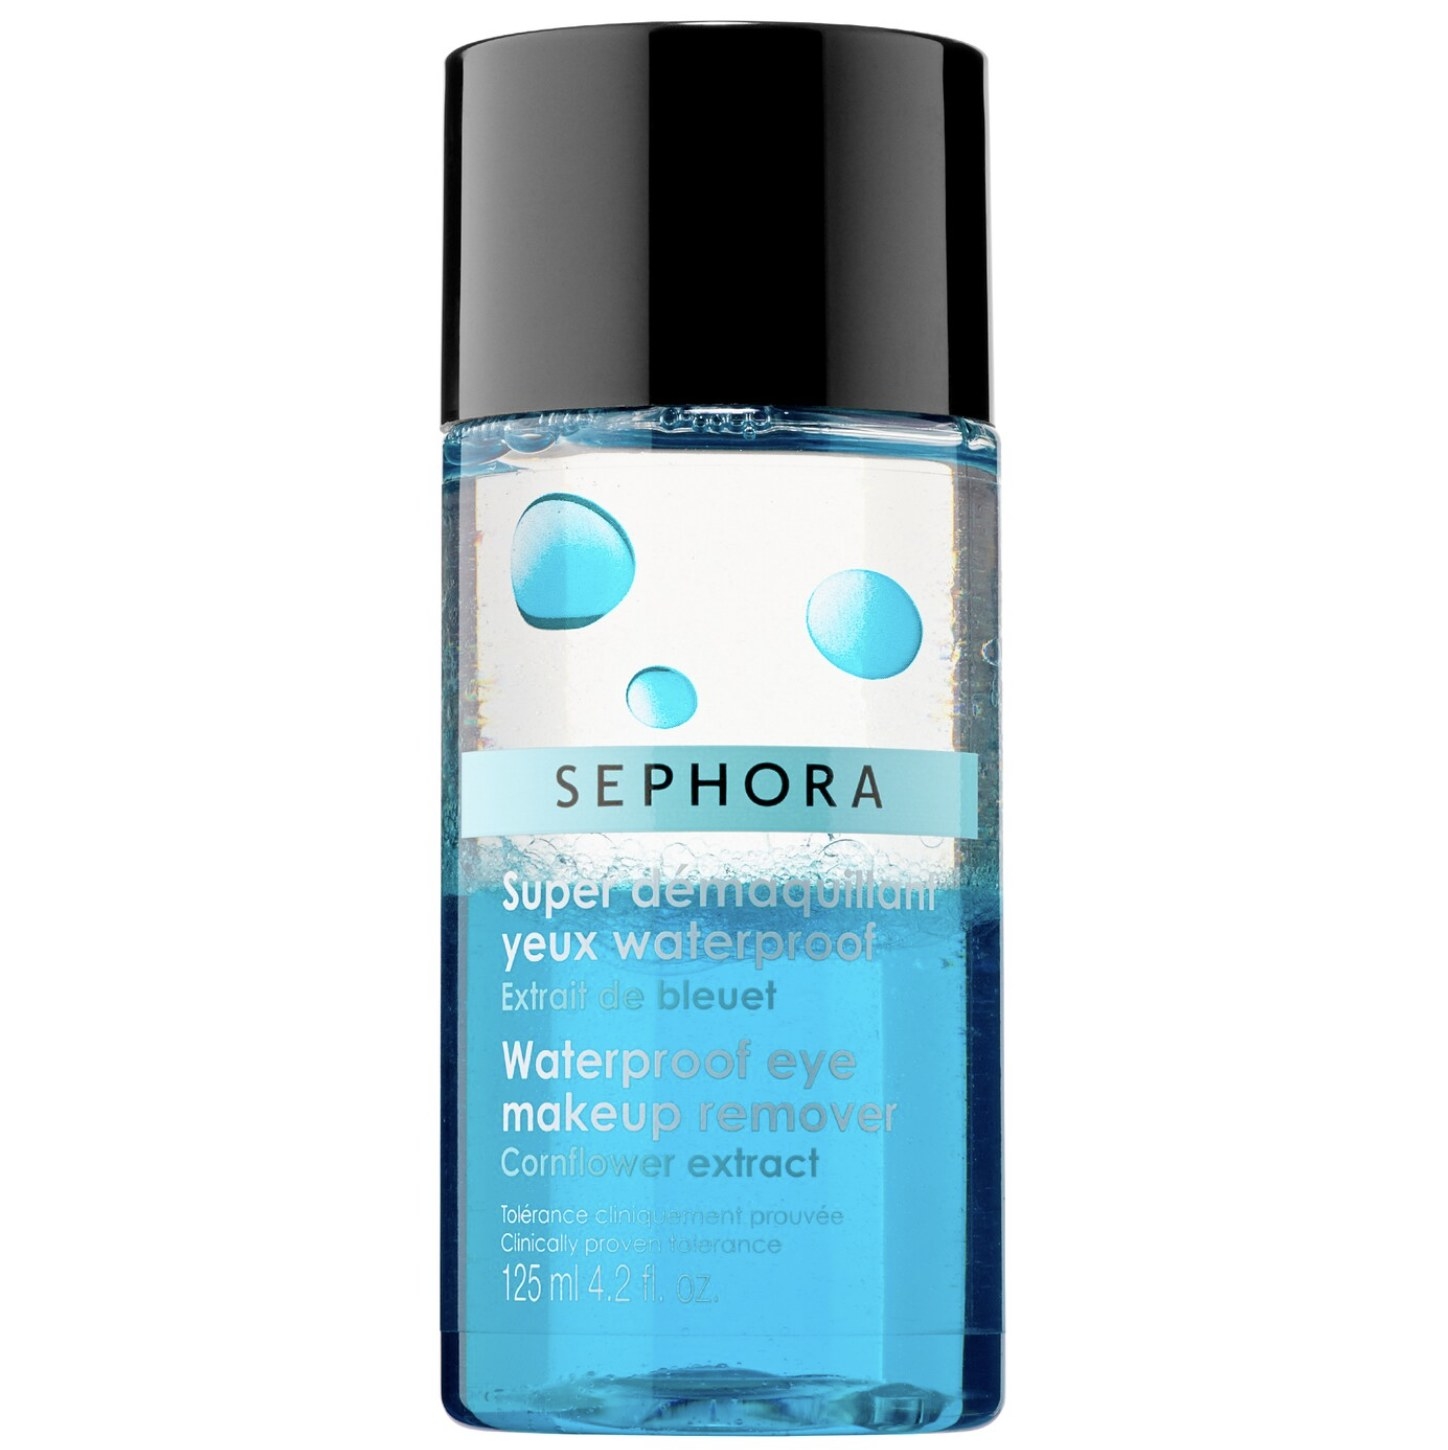 The makeup remover